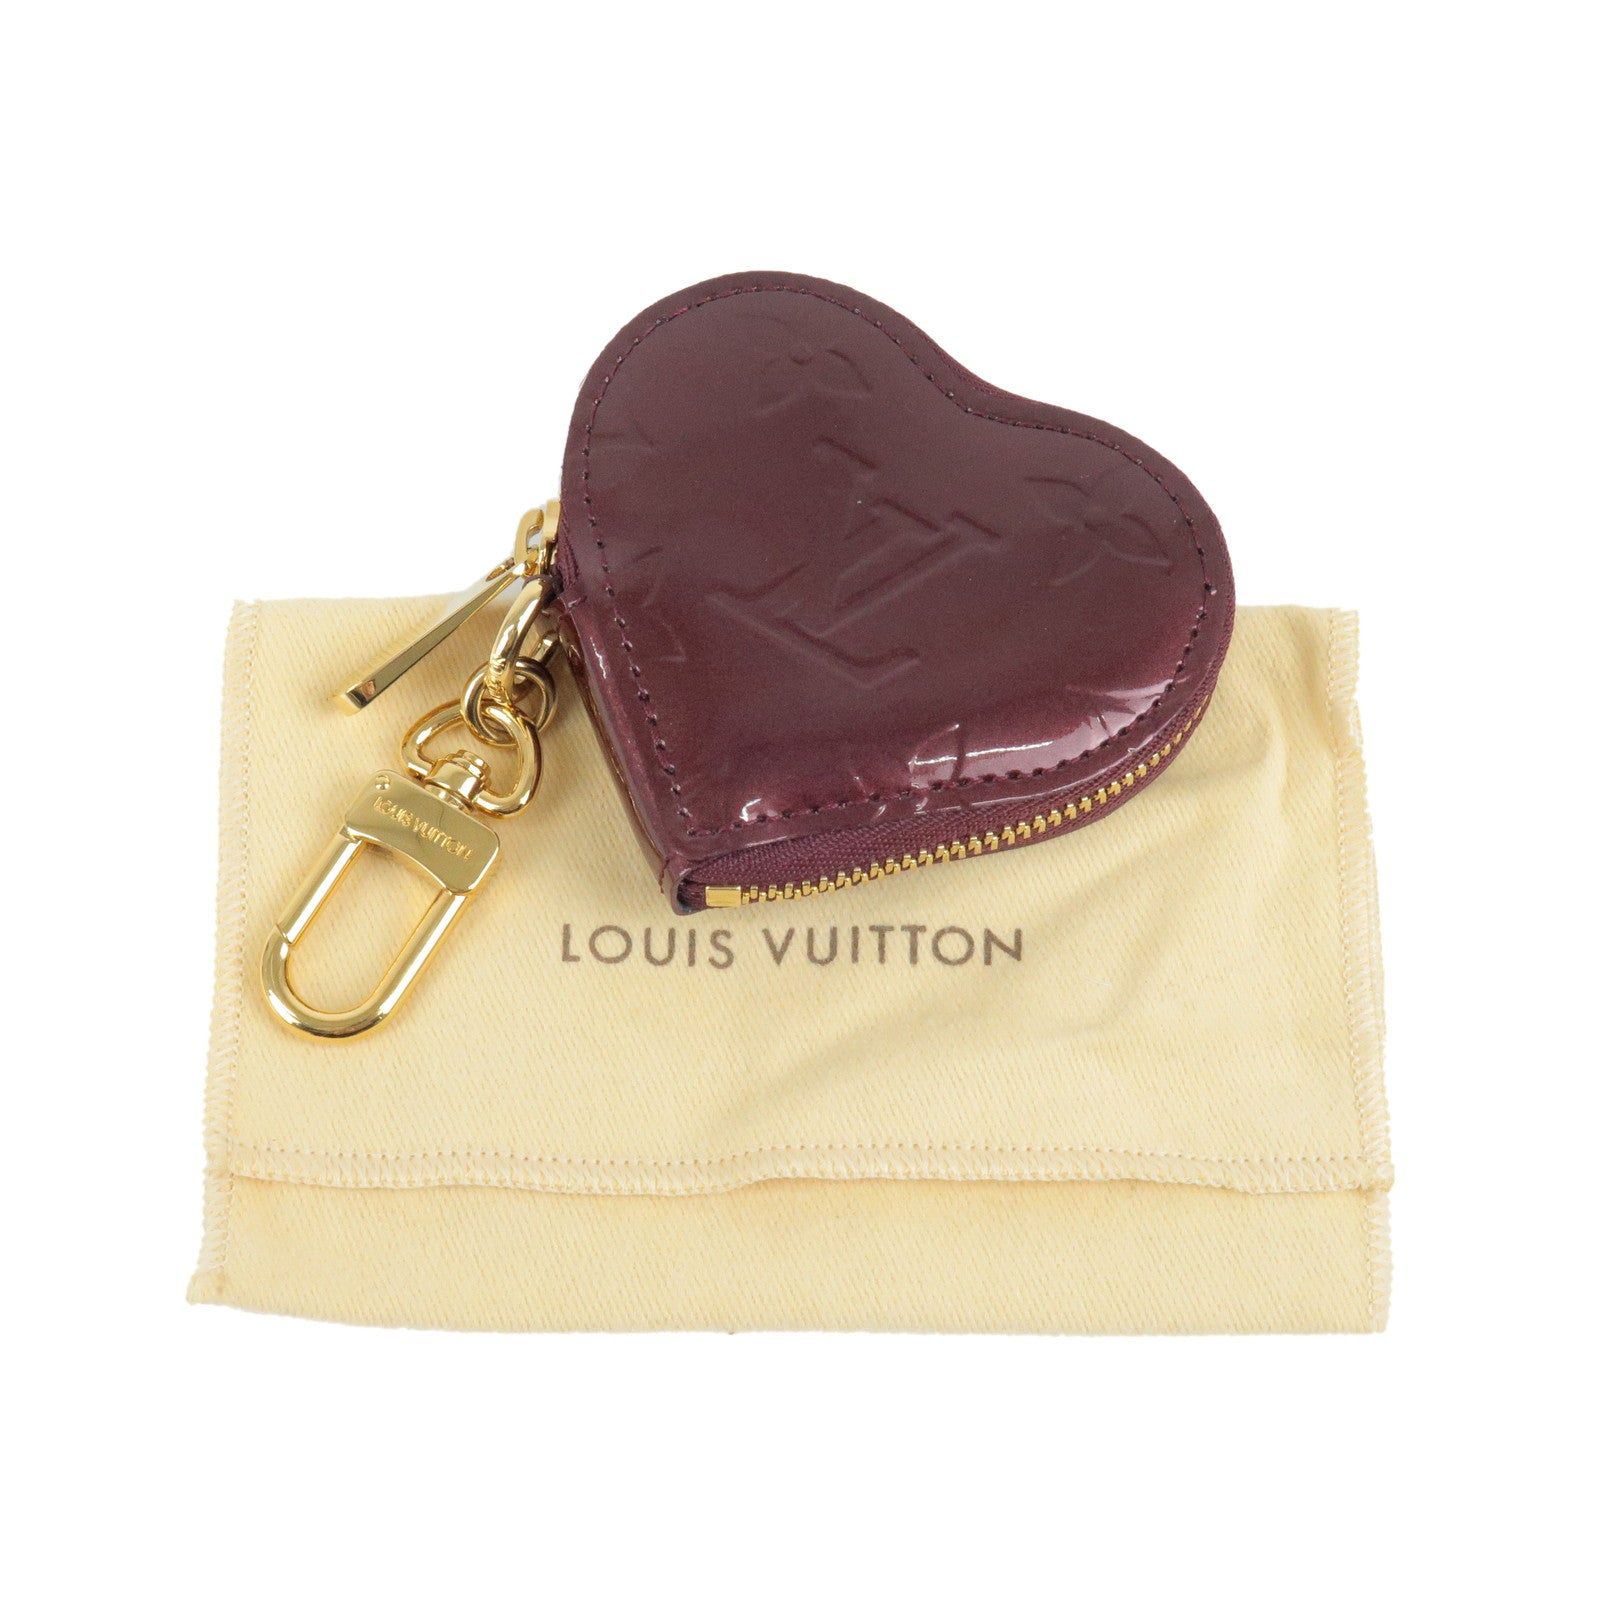 Louis Vuitton Red Vernis Leather Heart Wristlet Coin Pouch